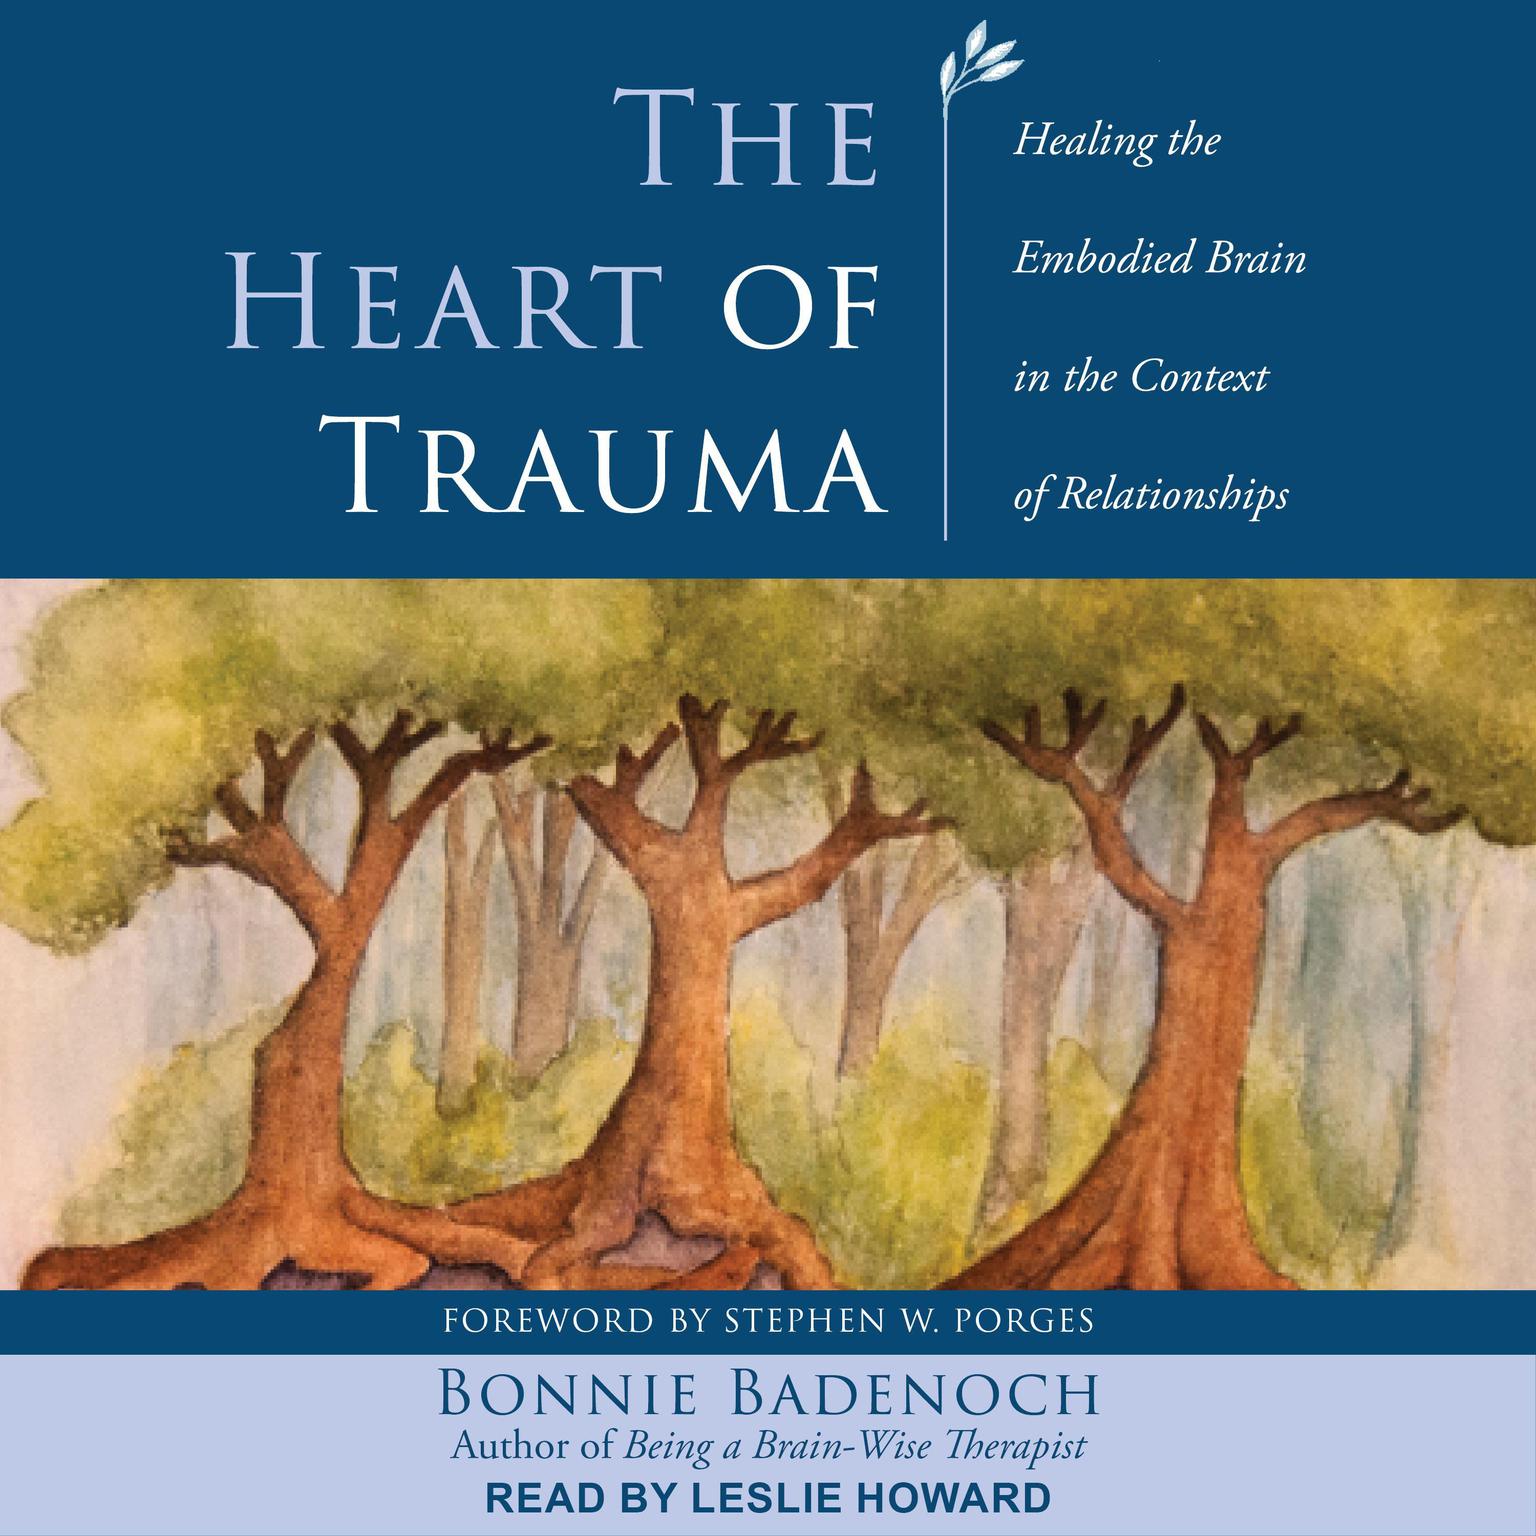 The Heart of Trauma: Healing the Embodied Brain in the Context of Relationships Audiobook, by Bonnie Badenoch